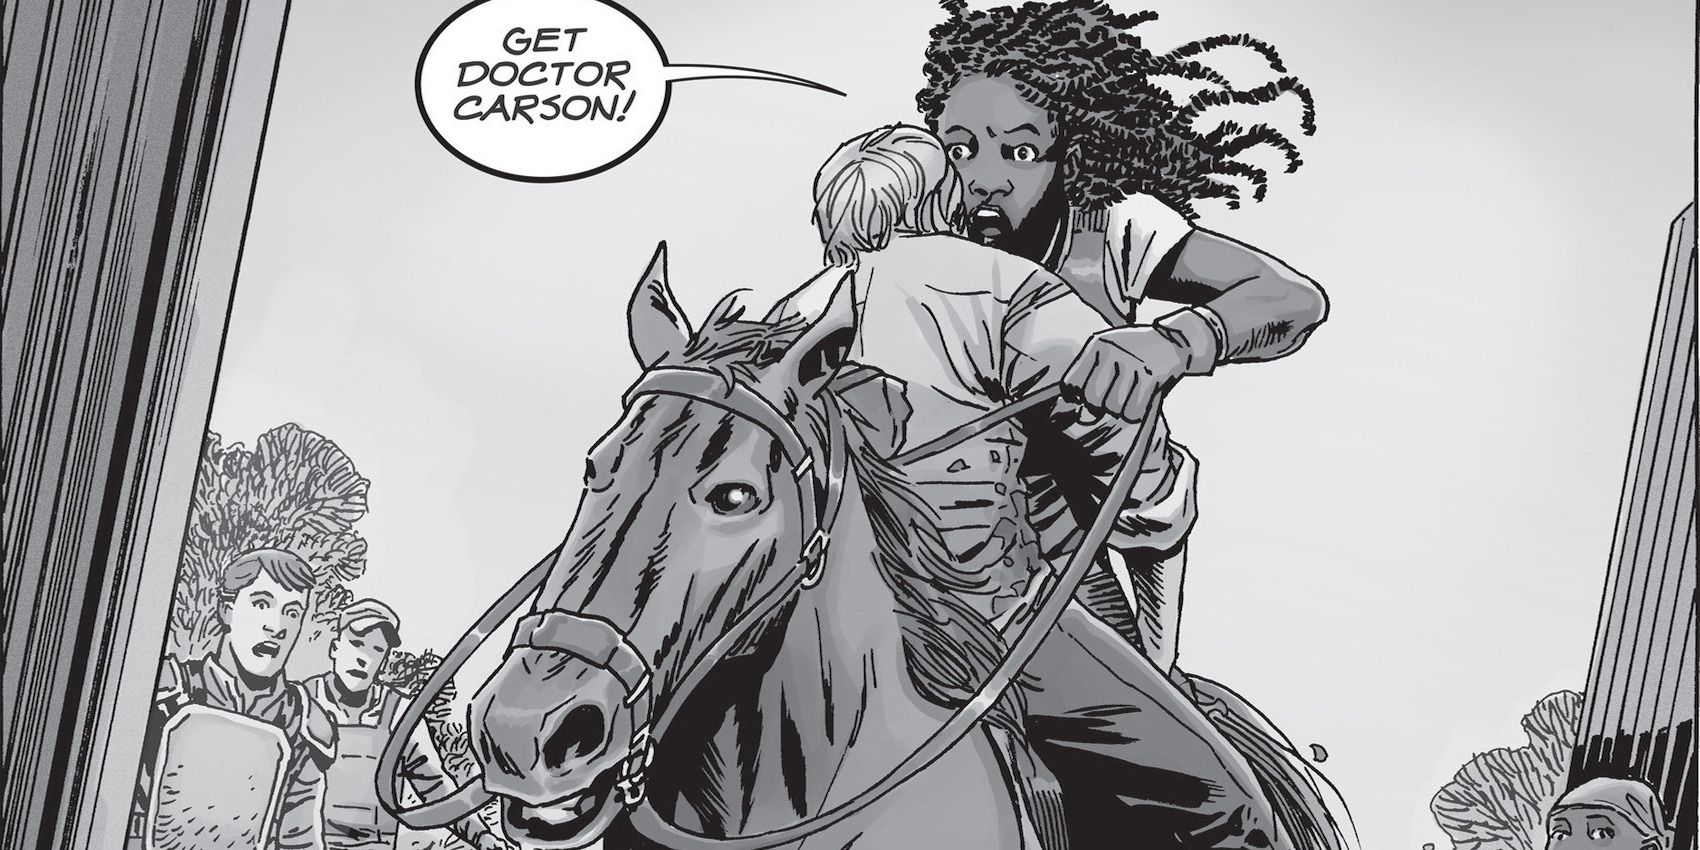 Michonne rides a horse to save Aaron in The Walking Dead comic